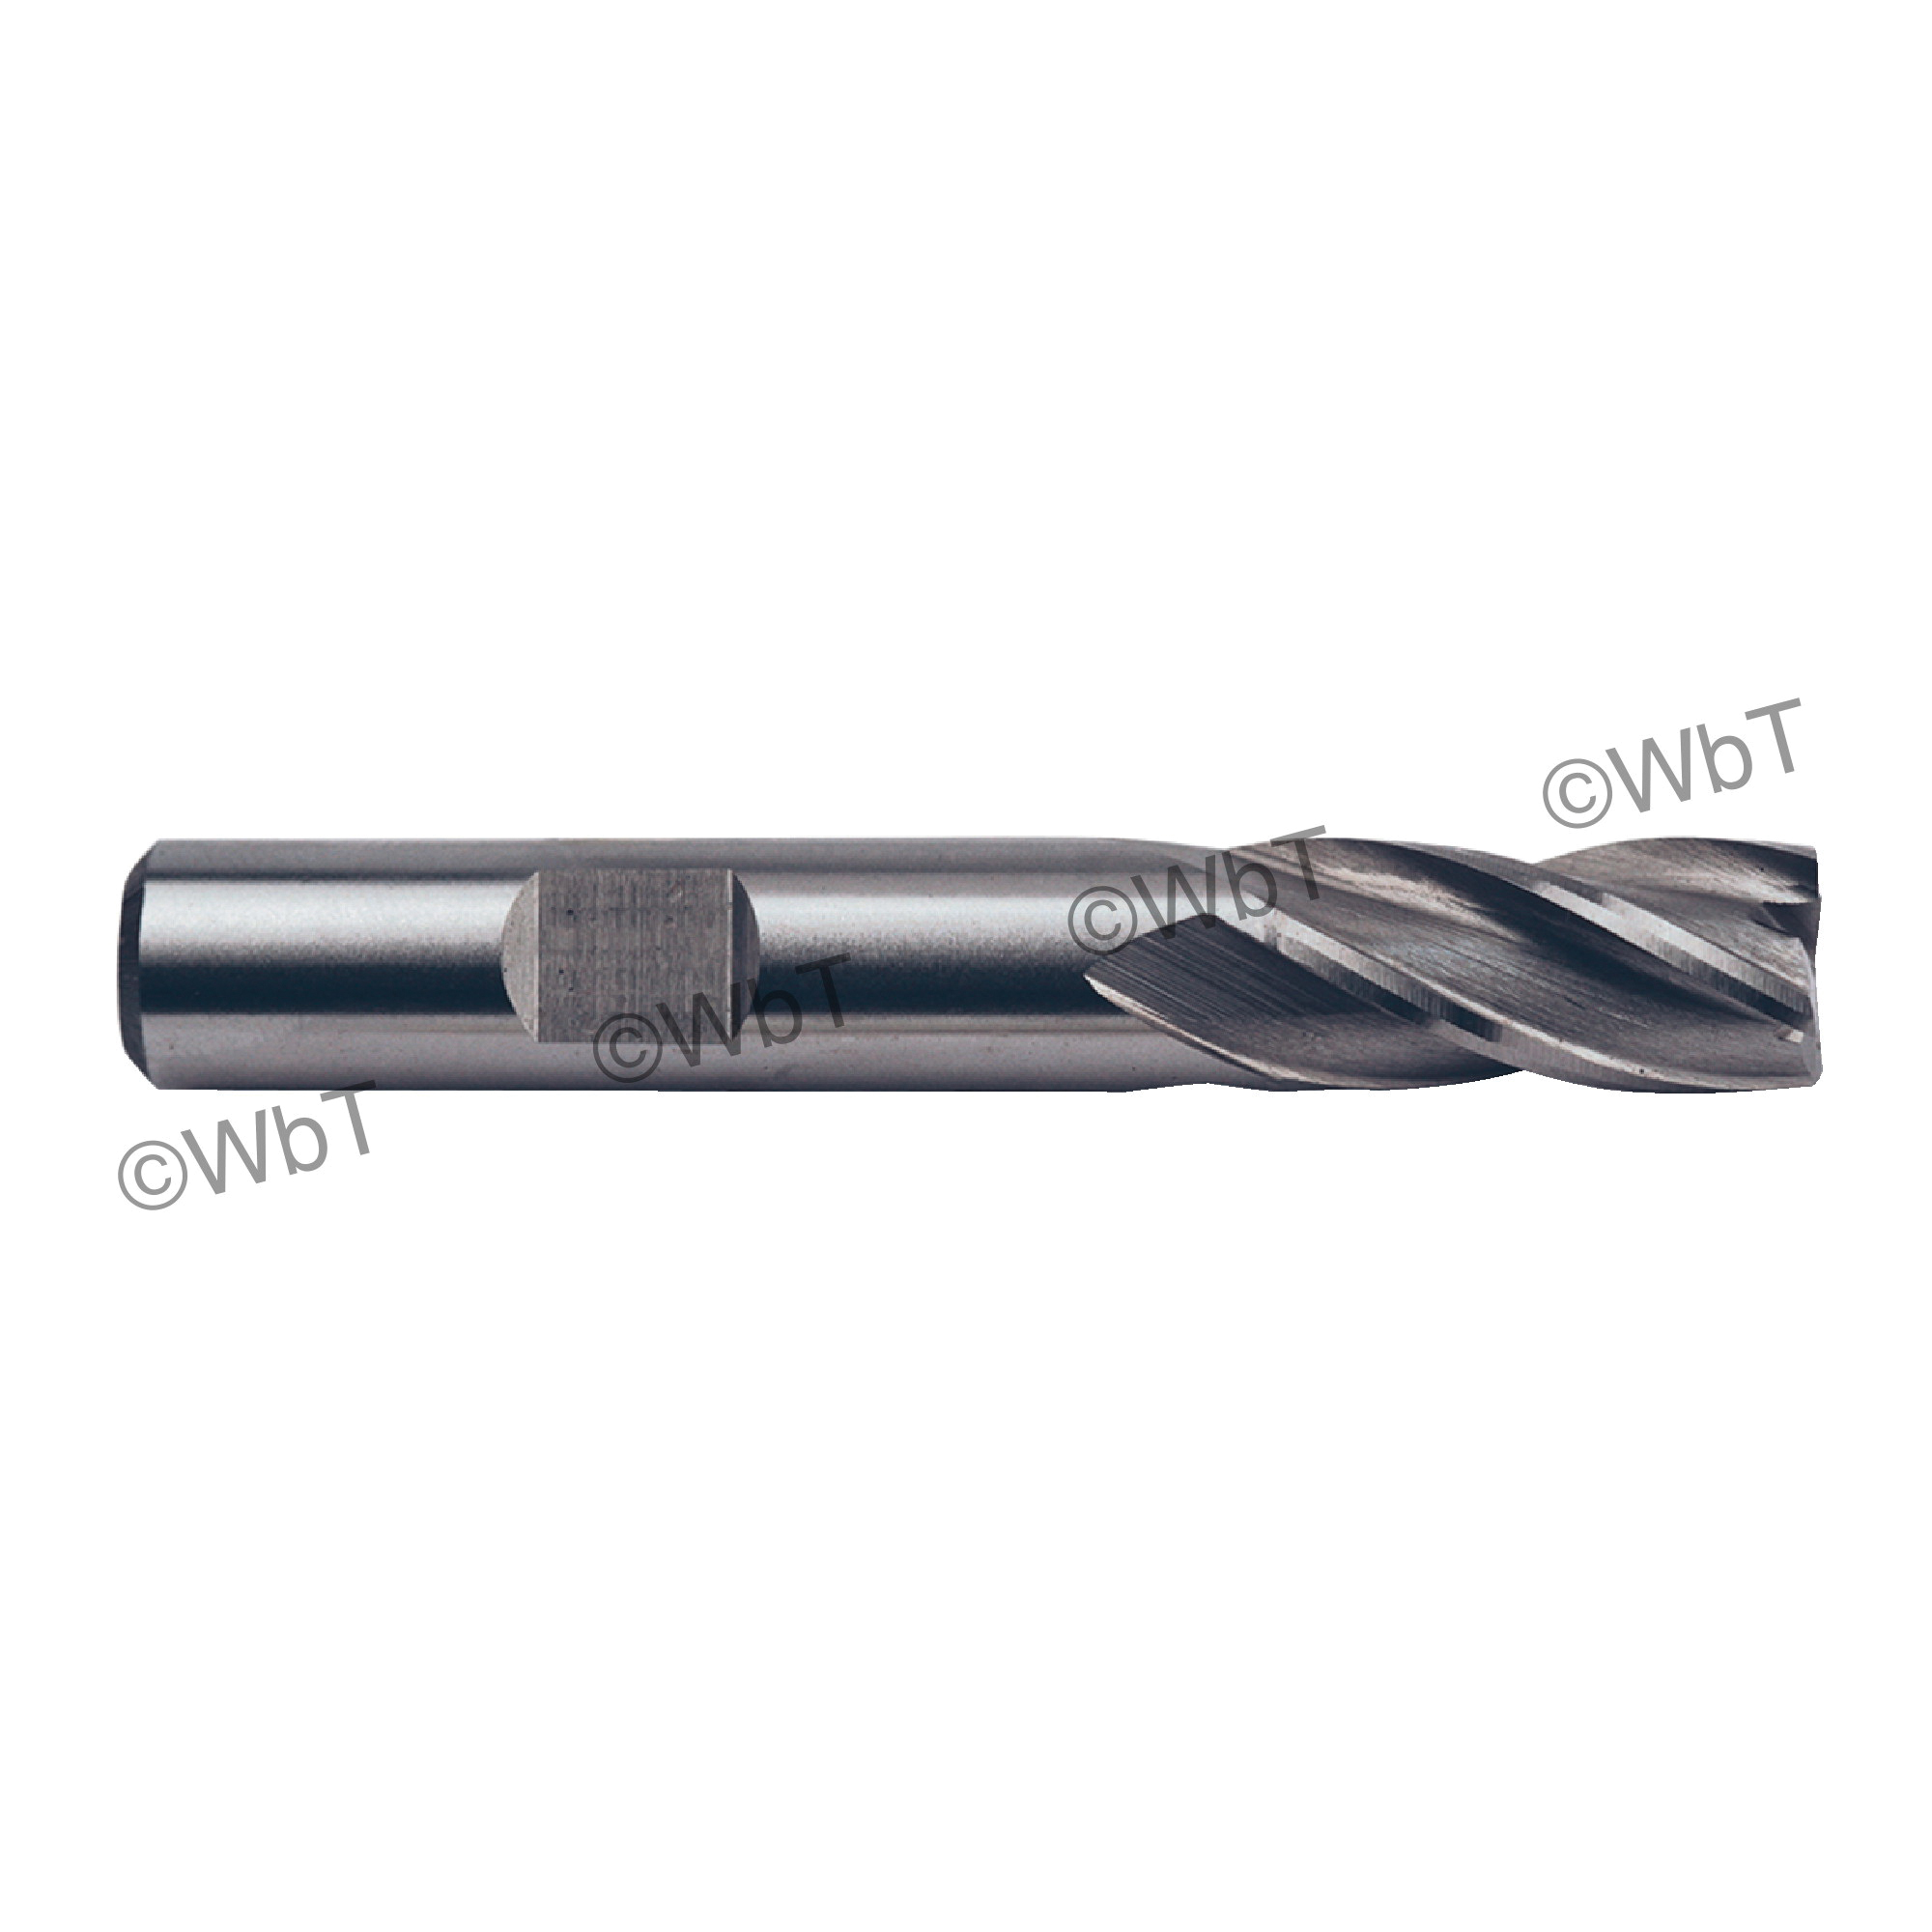 TTC 08-015-140 D5 Center Cutting Standard Length Single End Mill, 5/8 in Dia Cutter, 1-5/8 in Length of Cut, 4 Flutes, 5/8 in Dia Shank, 3-3/4 in OAL, Bright